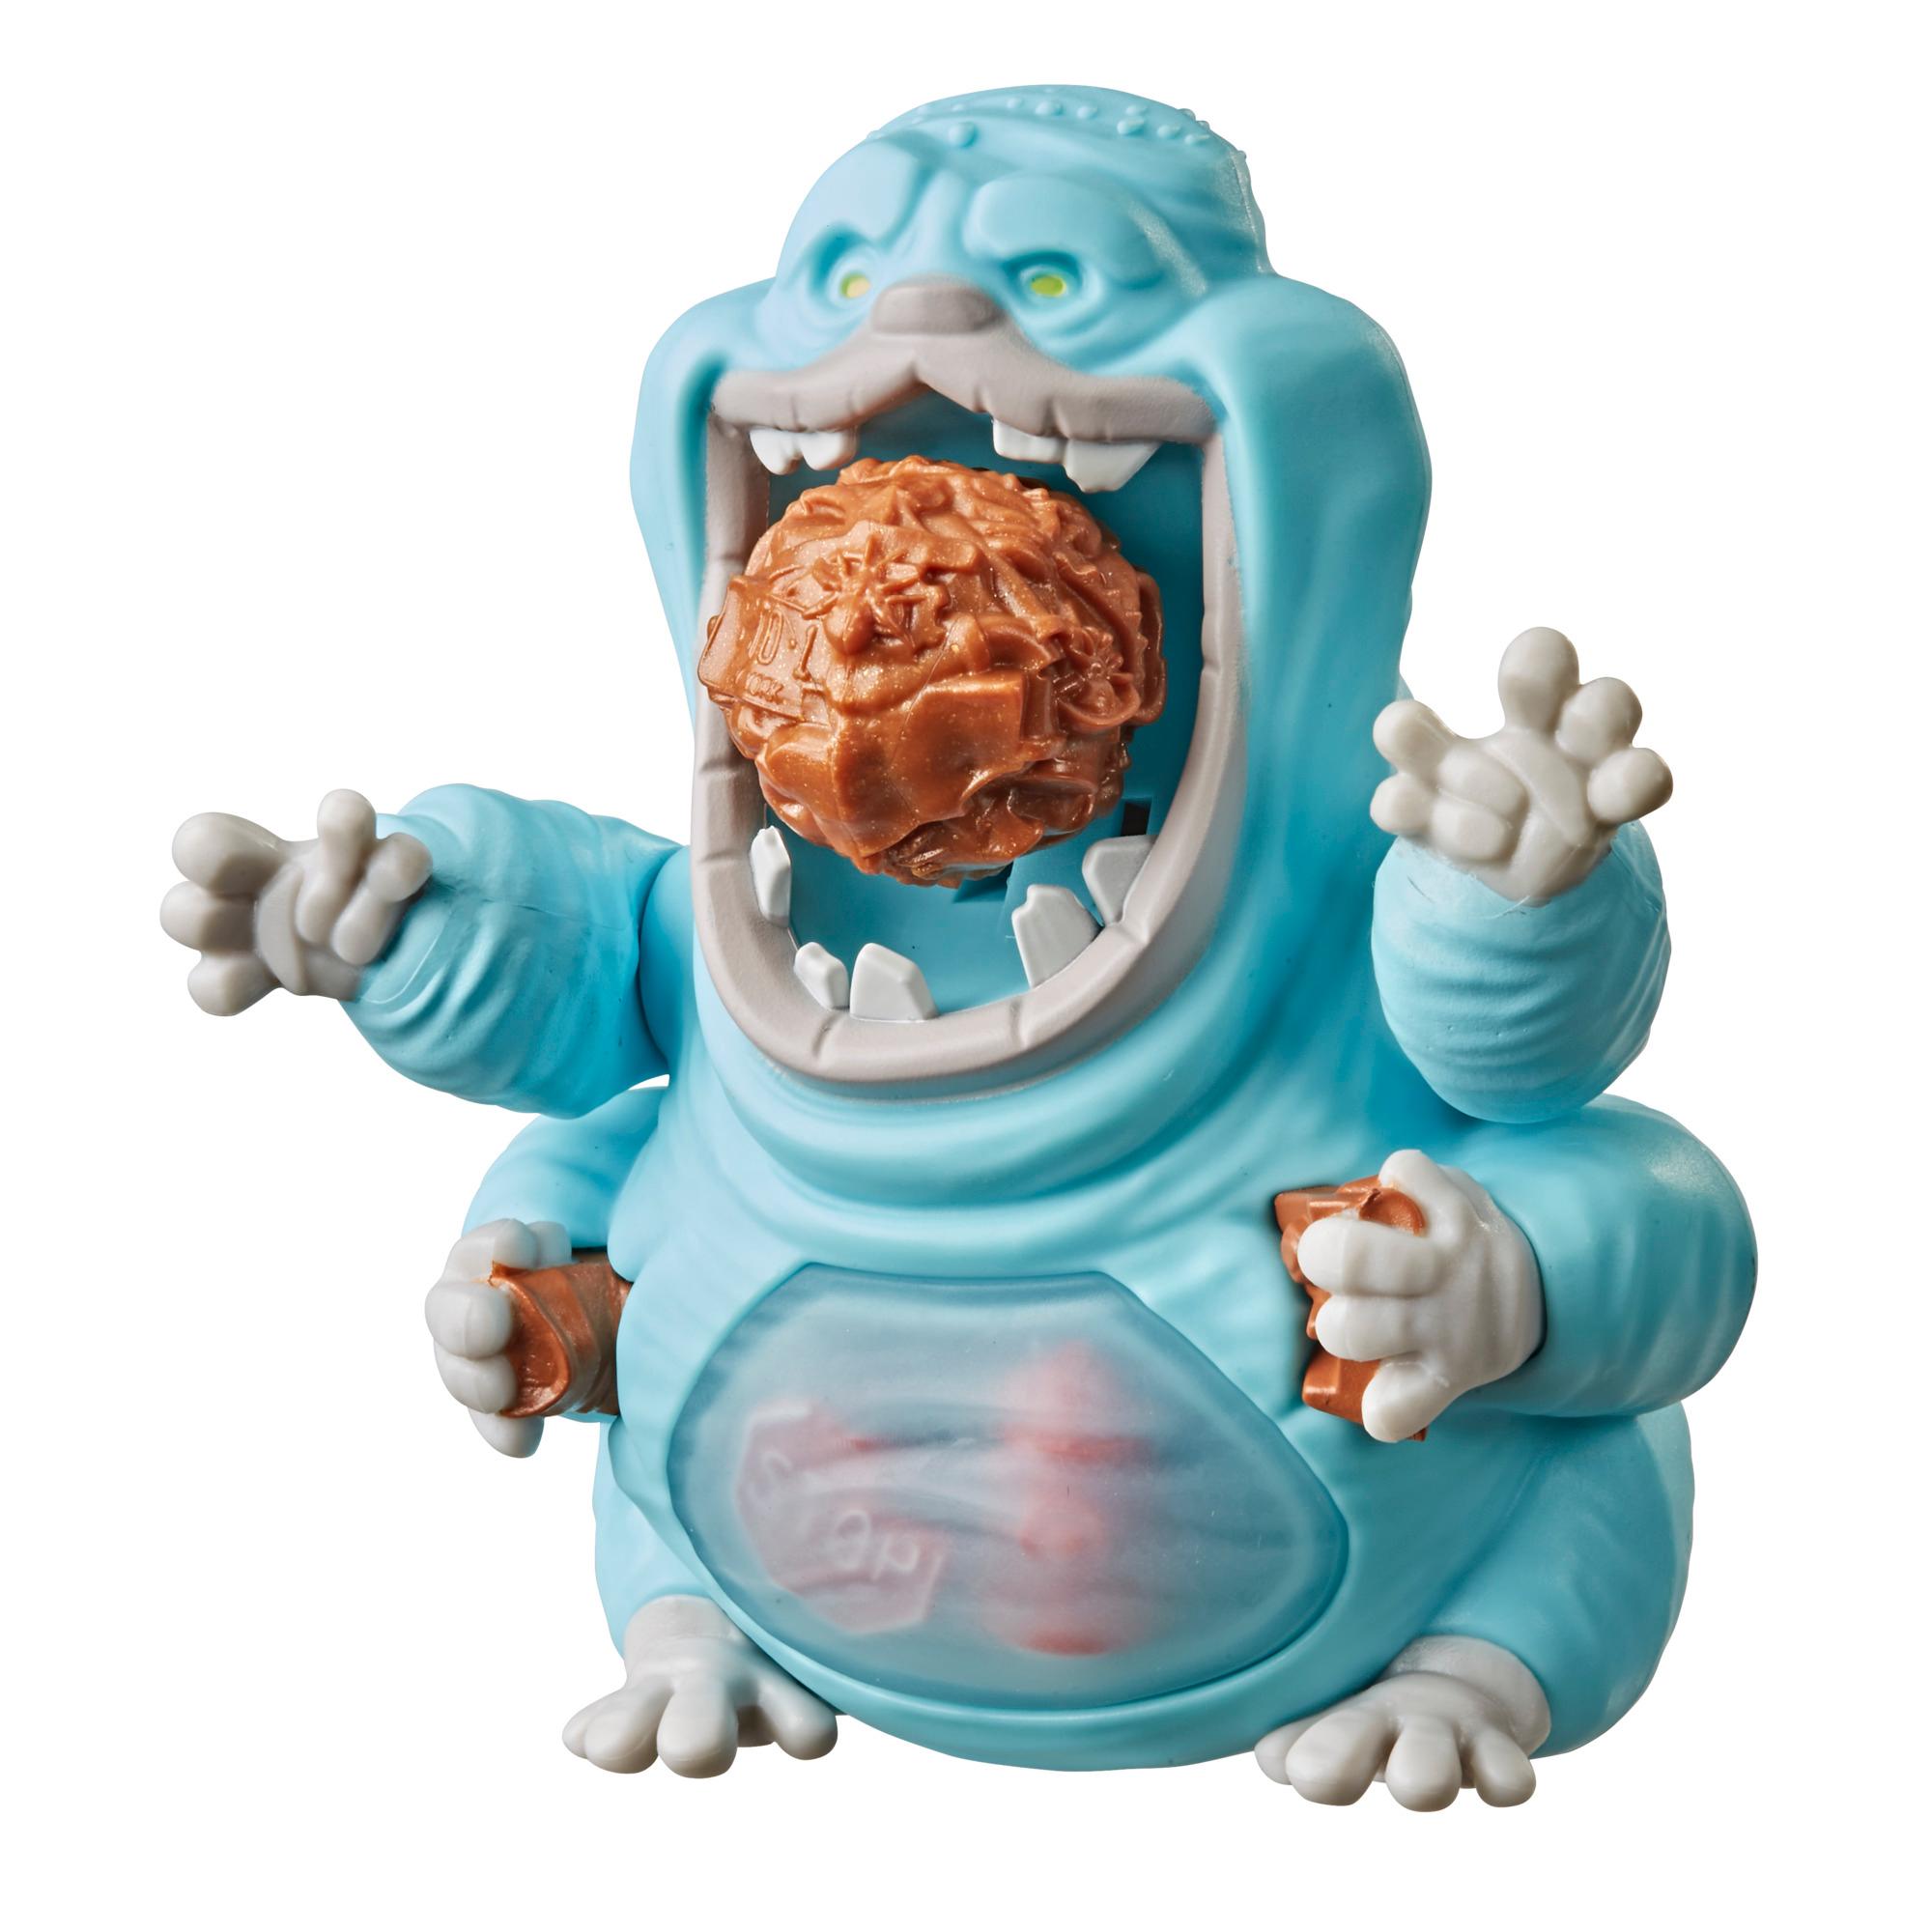 Ghostbusters Fright Feature Muncher Ghost Figure with Fright Features, Toys for Kids Ages 4 and Up